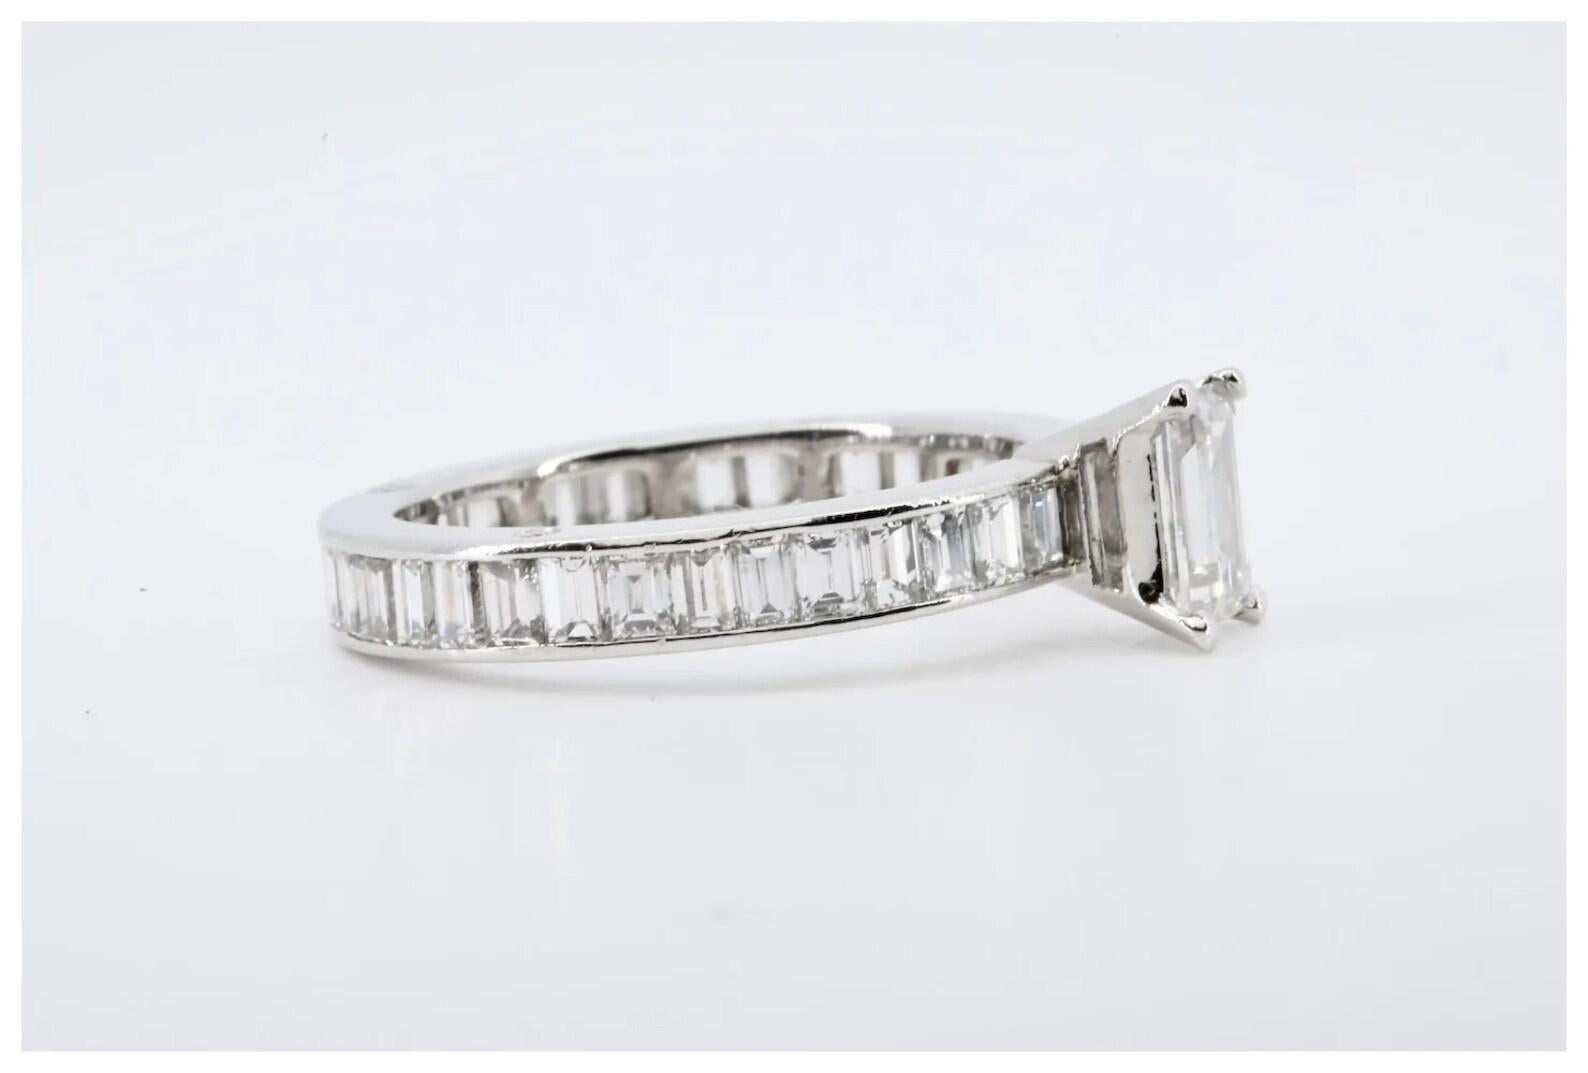 An Art Deco emerald cut diamond engagement ring in platinum, the band channel set with thirty eight further emerald cut diamonds.

Centered by a 0.85 carat emerald cut diamond of H color, and VS1 clarity.

The band set with 3.04 carats of H color VS